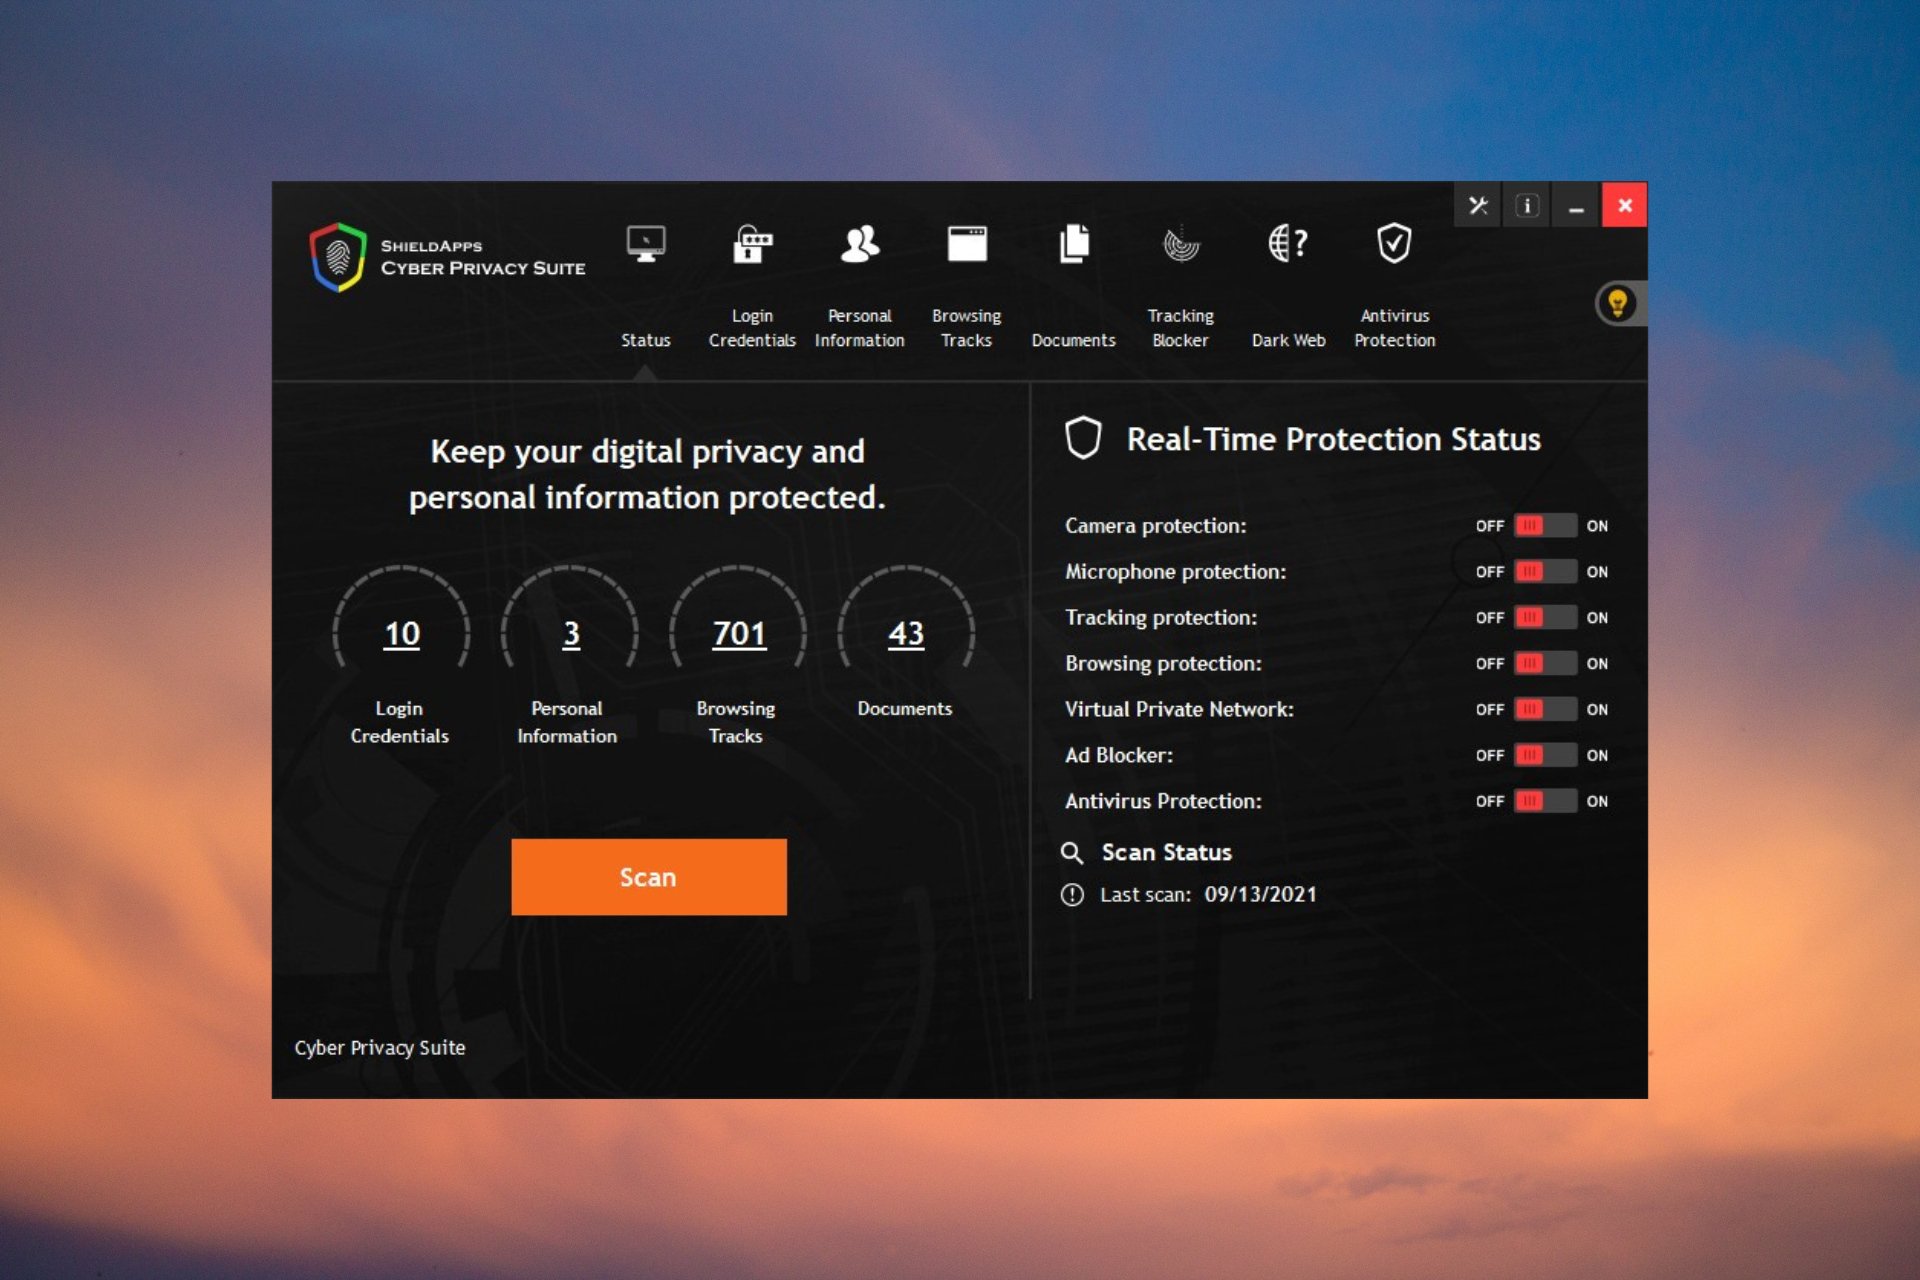 Cyber Privacy Suite features